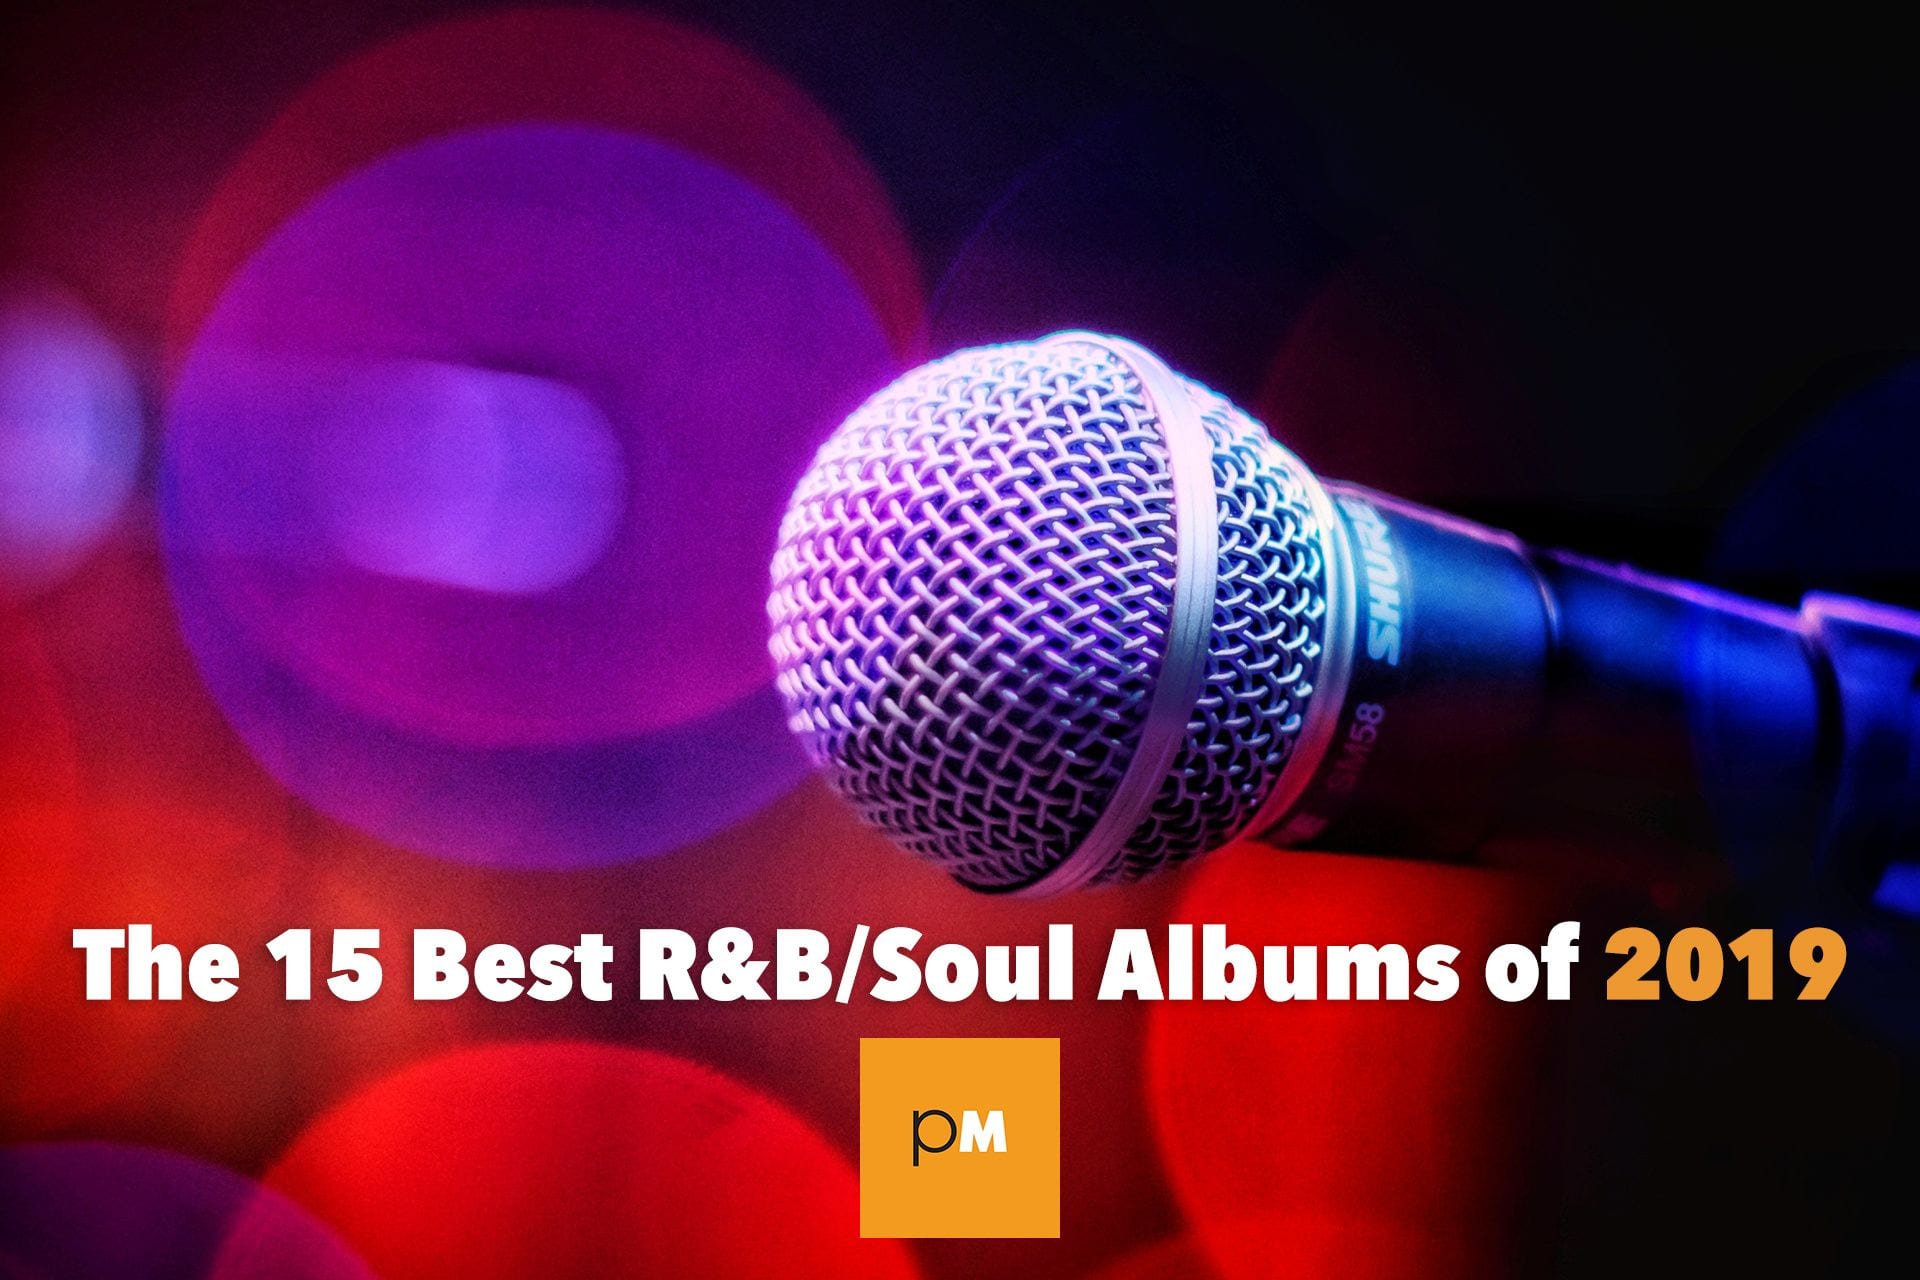 The 15 Best R&B/Soul Albums of 2019